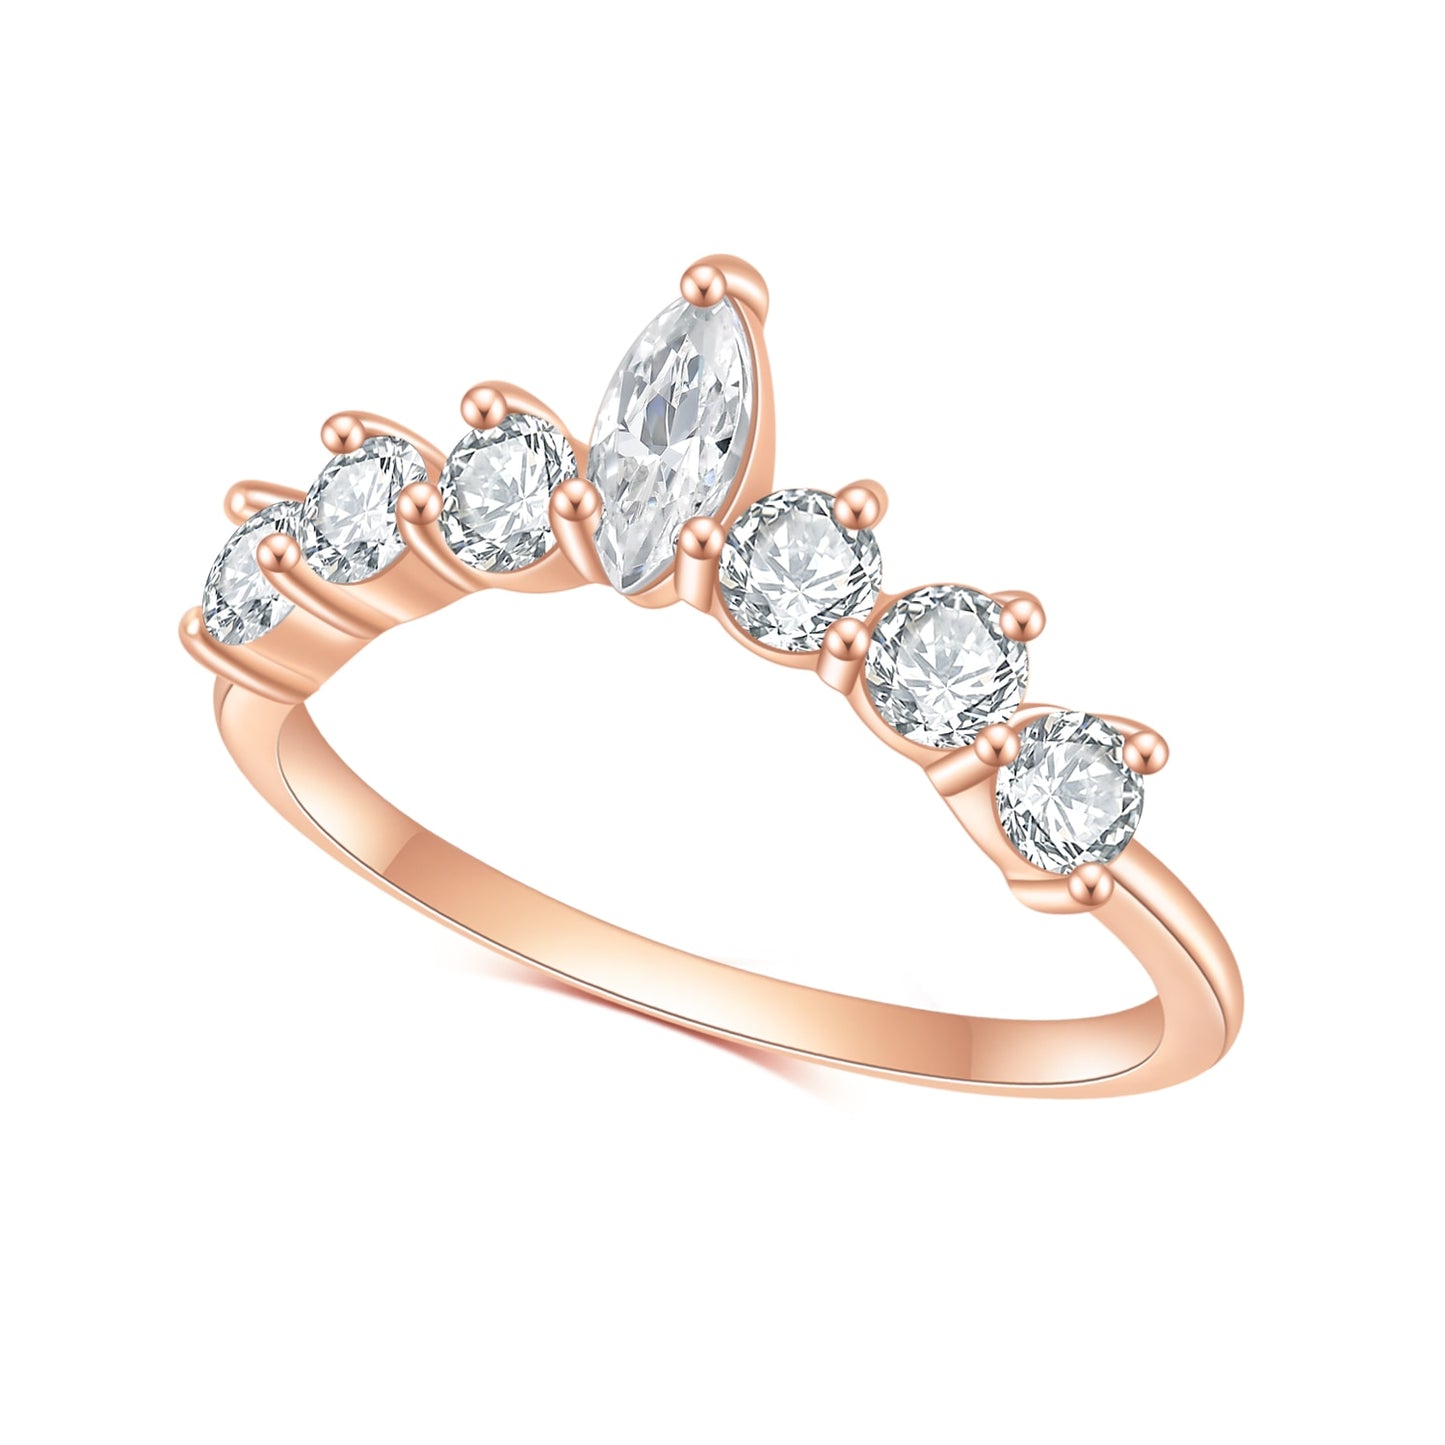 A rose gold slightly curved wedding ring with small round moissanites and a marquise moissanite in the center.